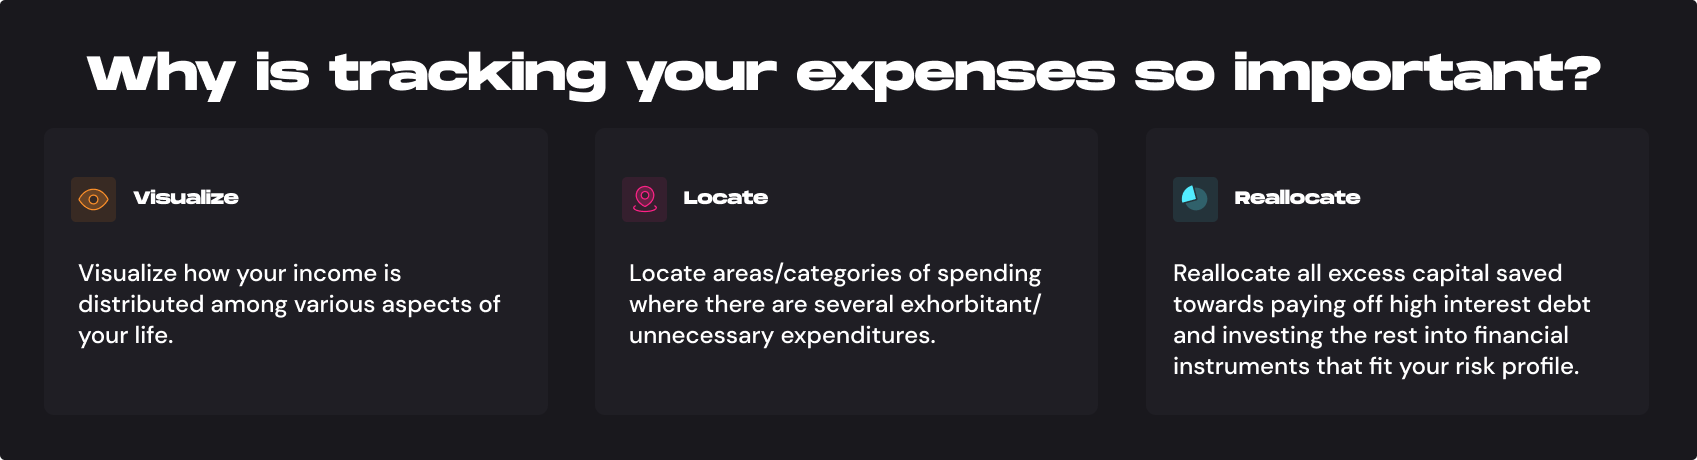 Expenses01.png